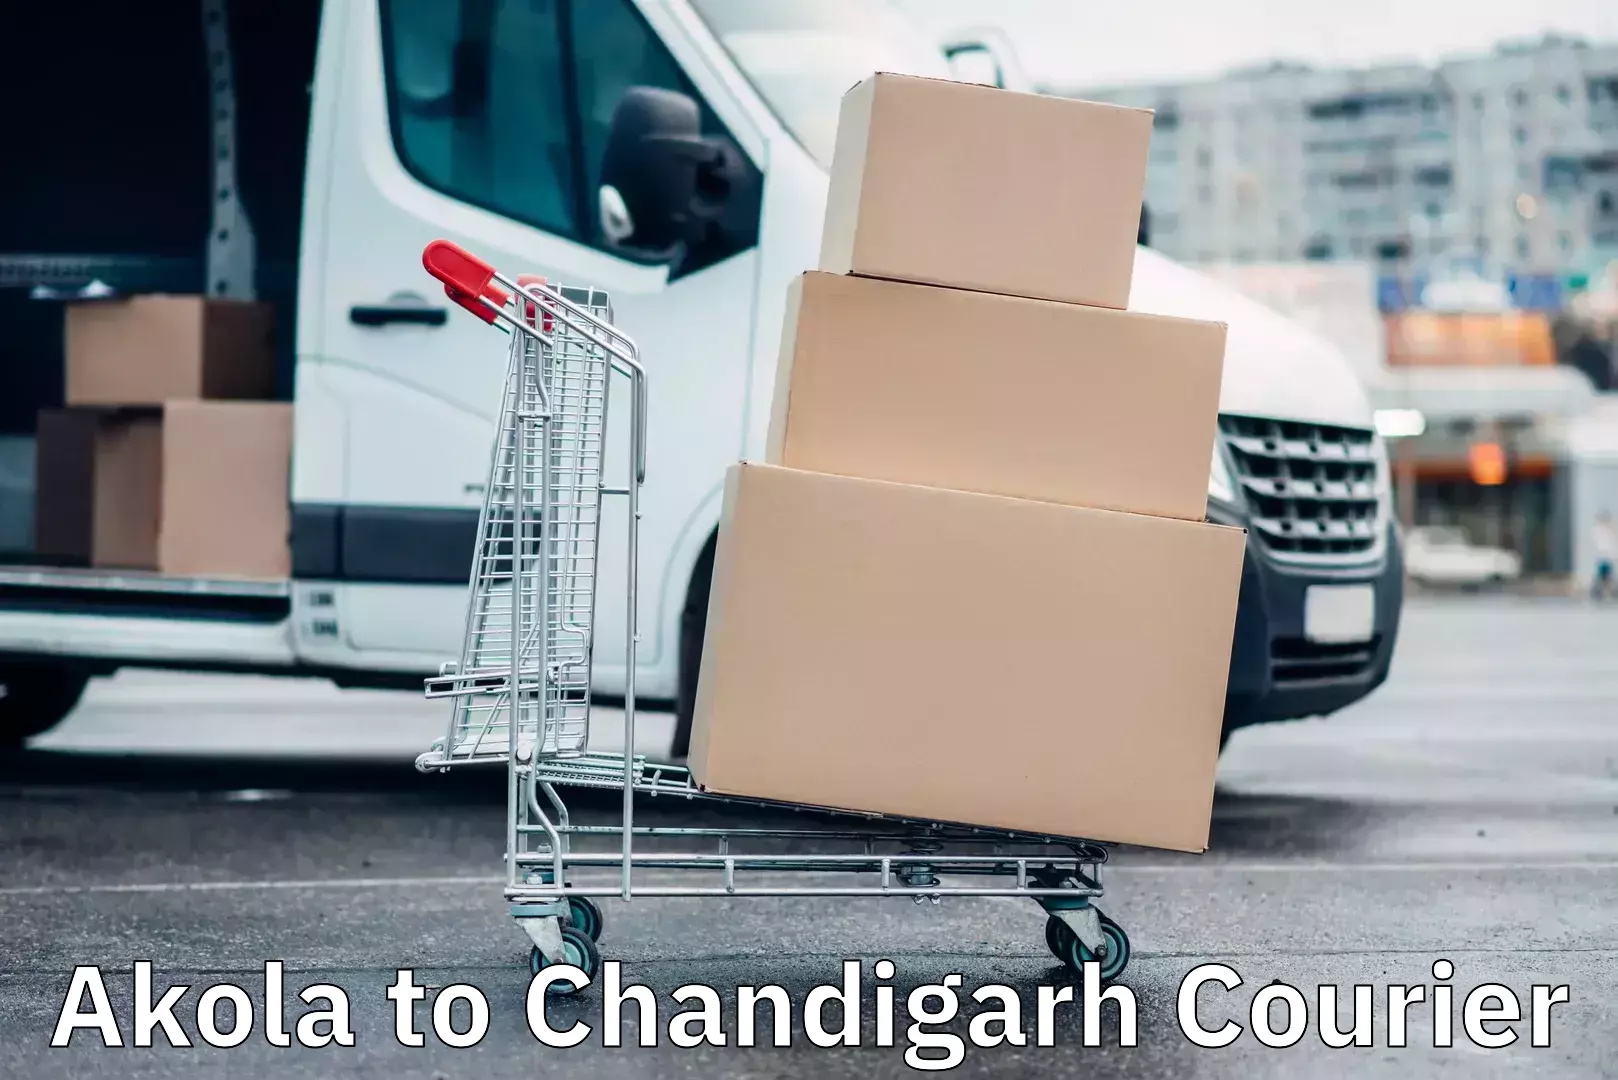 Subscription-based courier Akola to Chandigarh